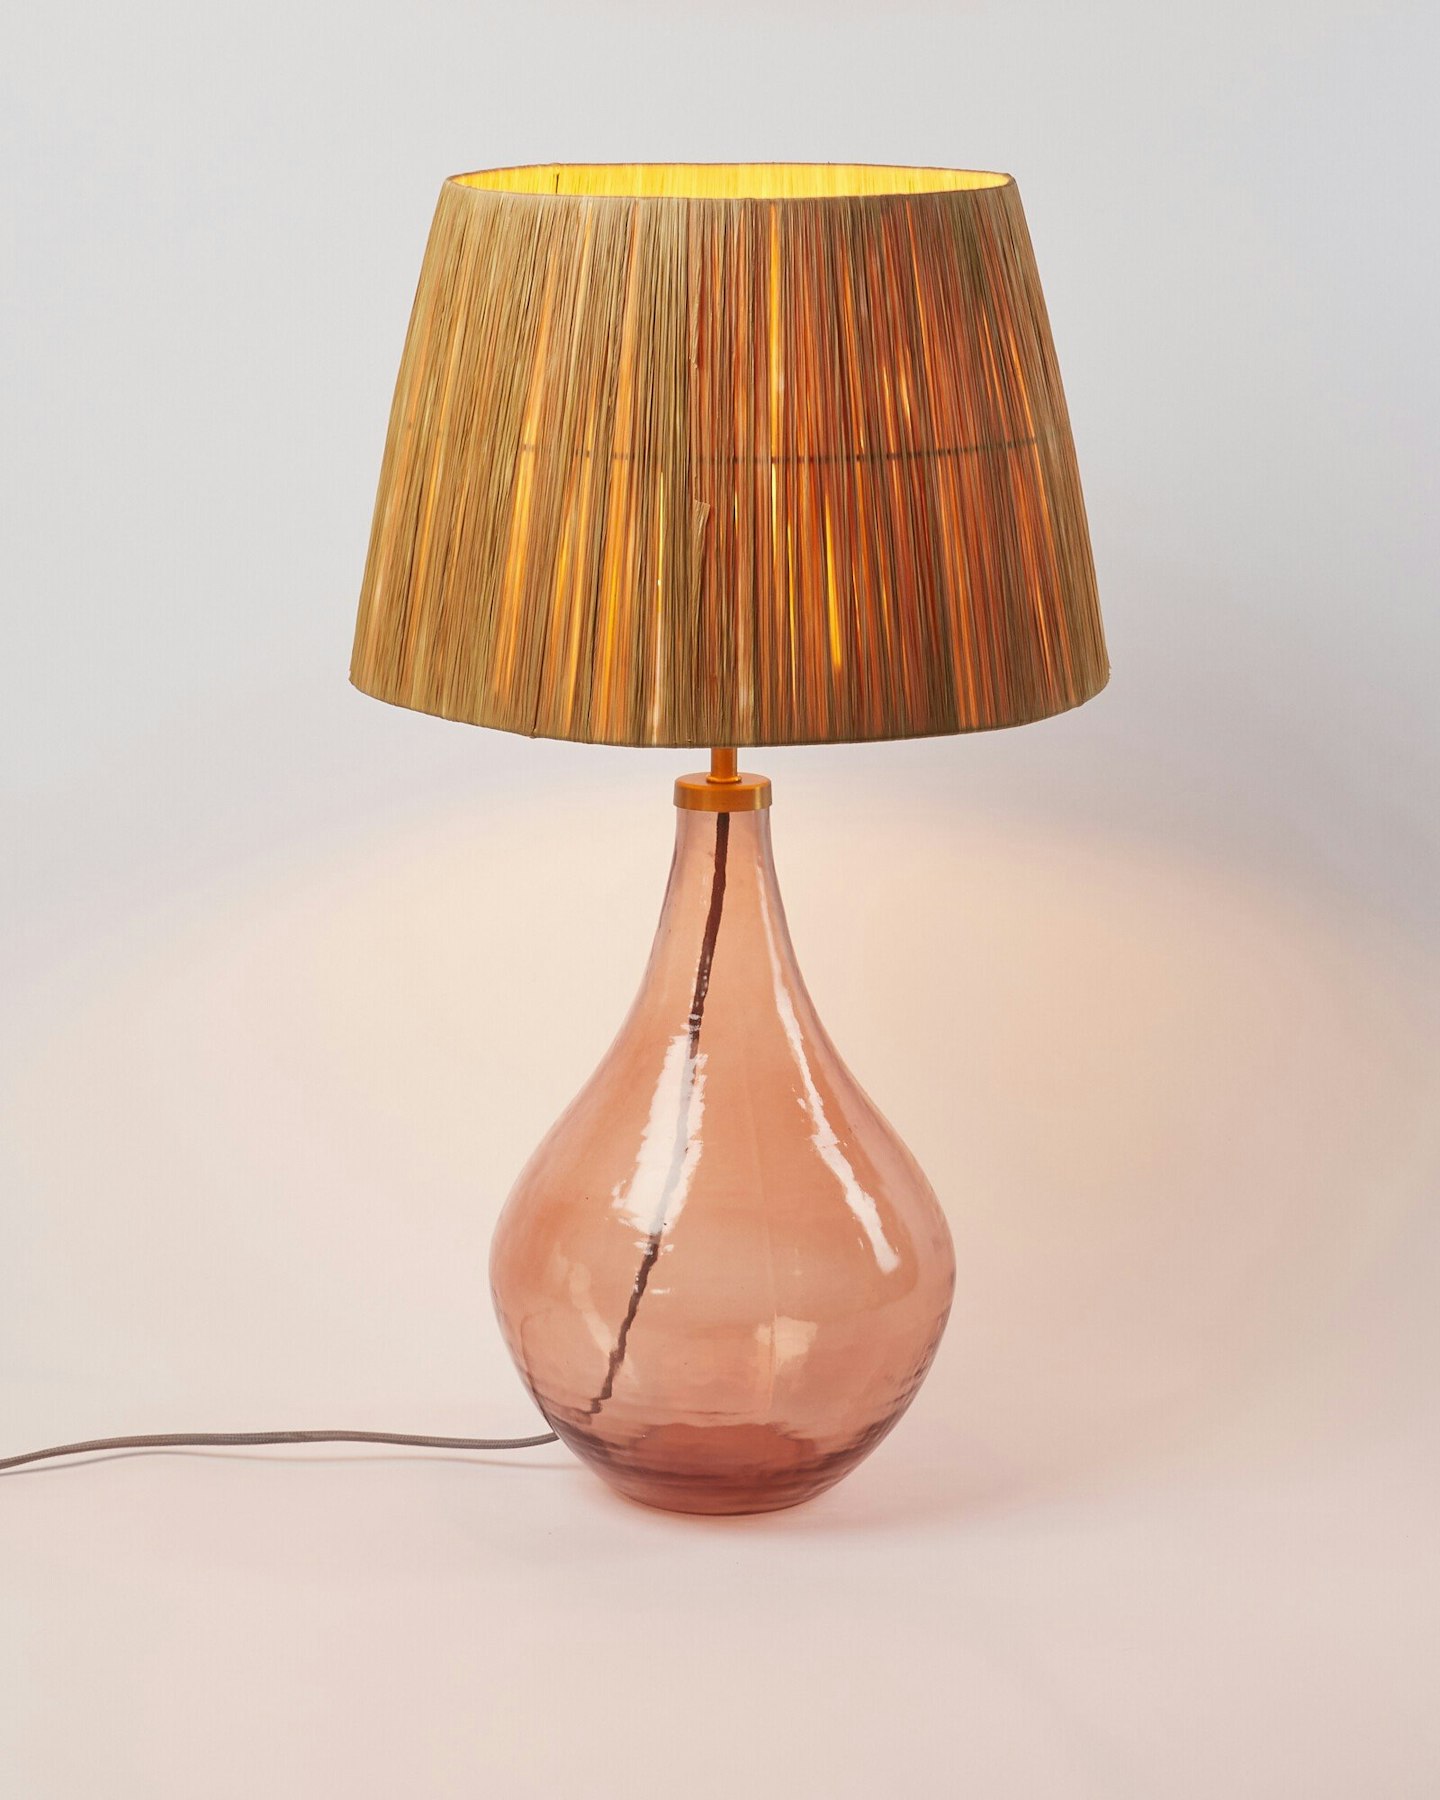 Oliver Bonas, Verre Pink Glass Desk & Table Lamp, WAS £125 NOW £88